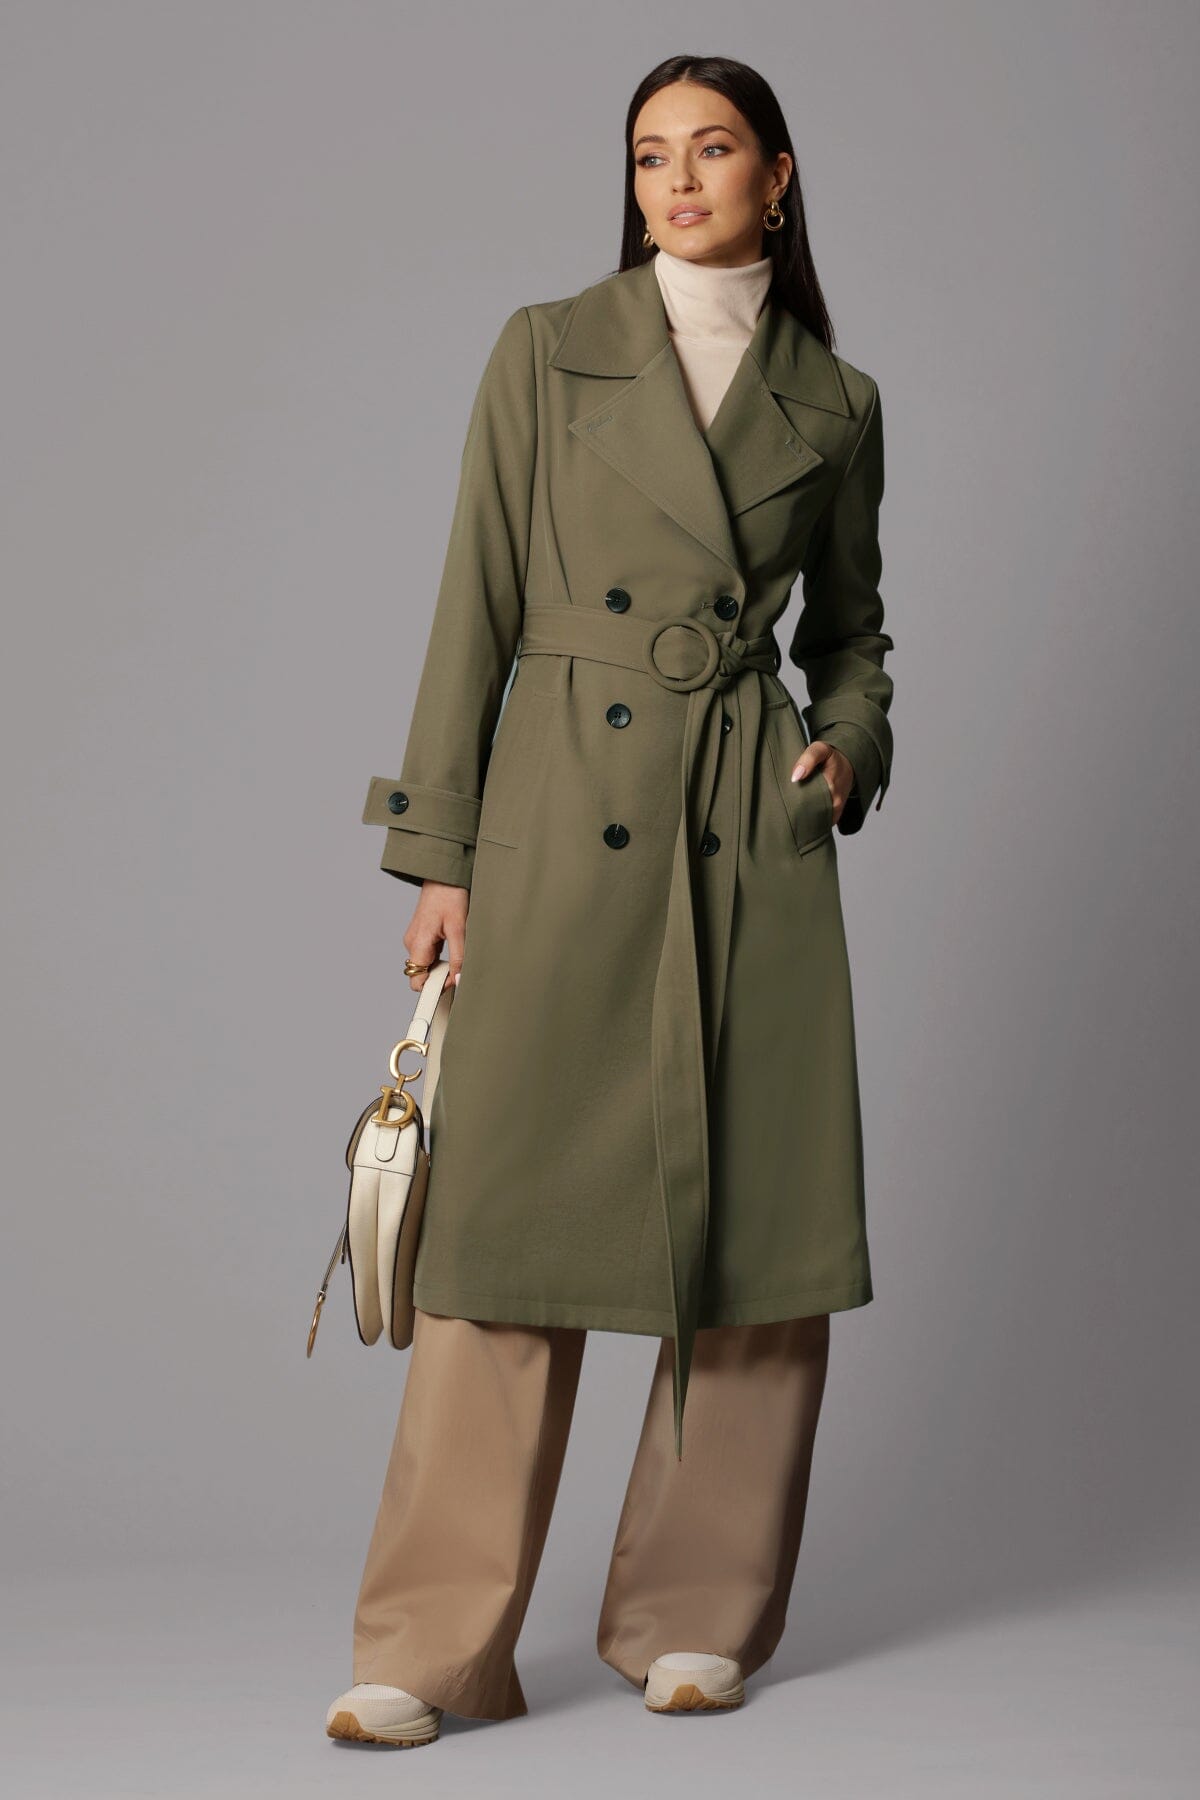 double breasted relaxed stretch crepe duster trench coat olive green - figure flattering designer fashion fall coats outerwear for women